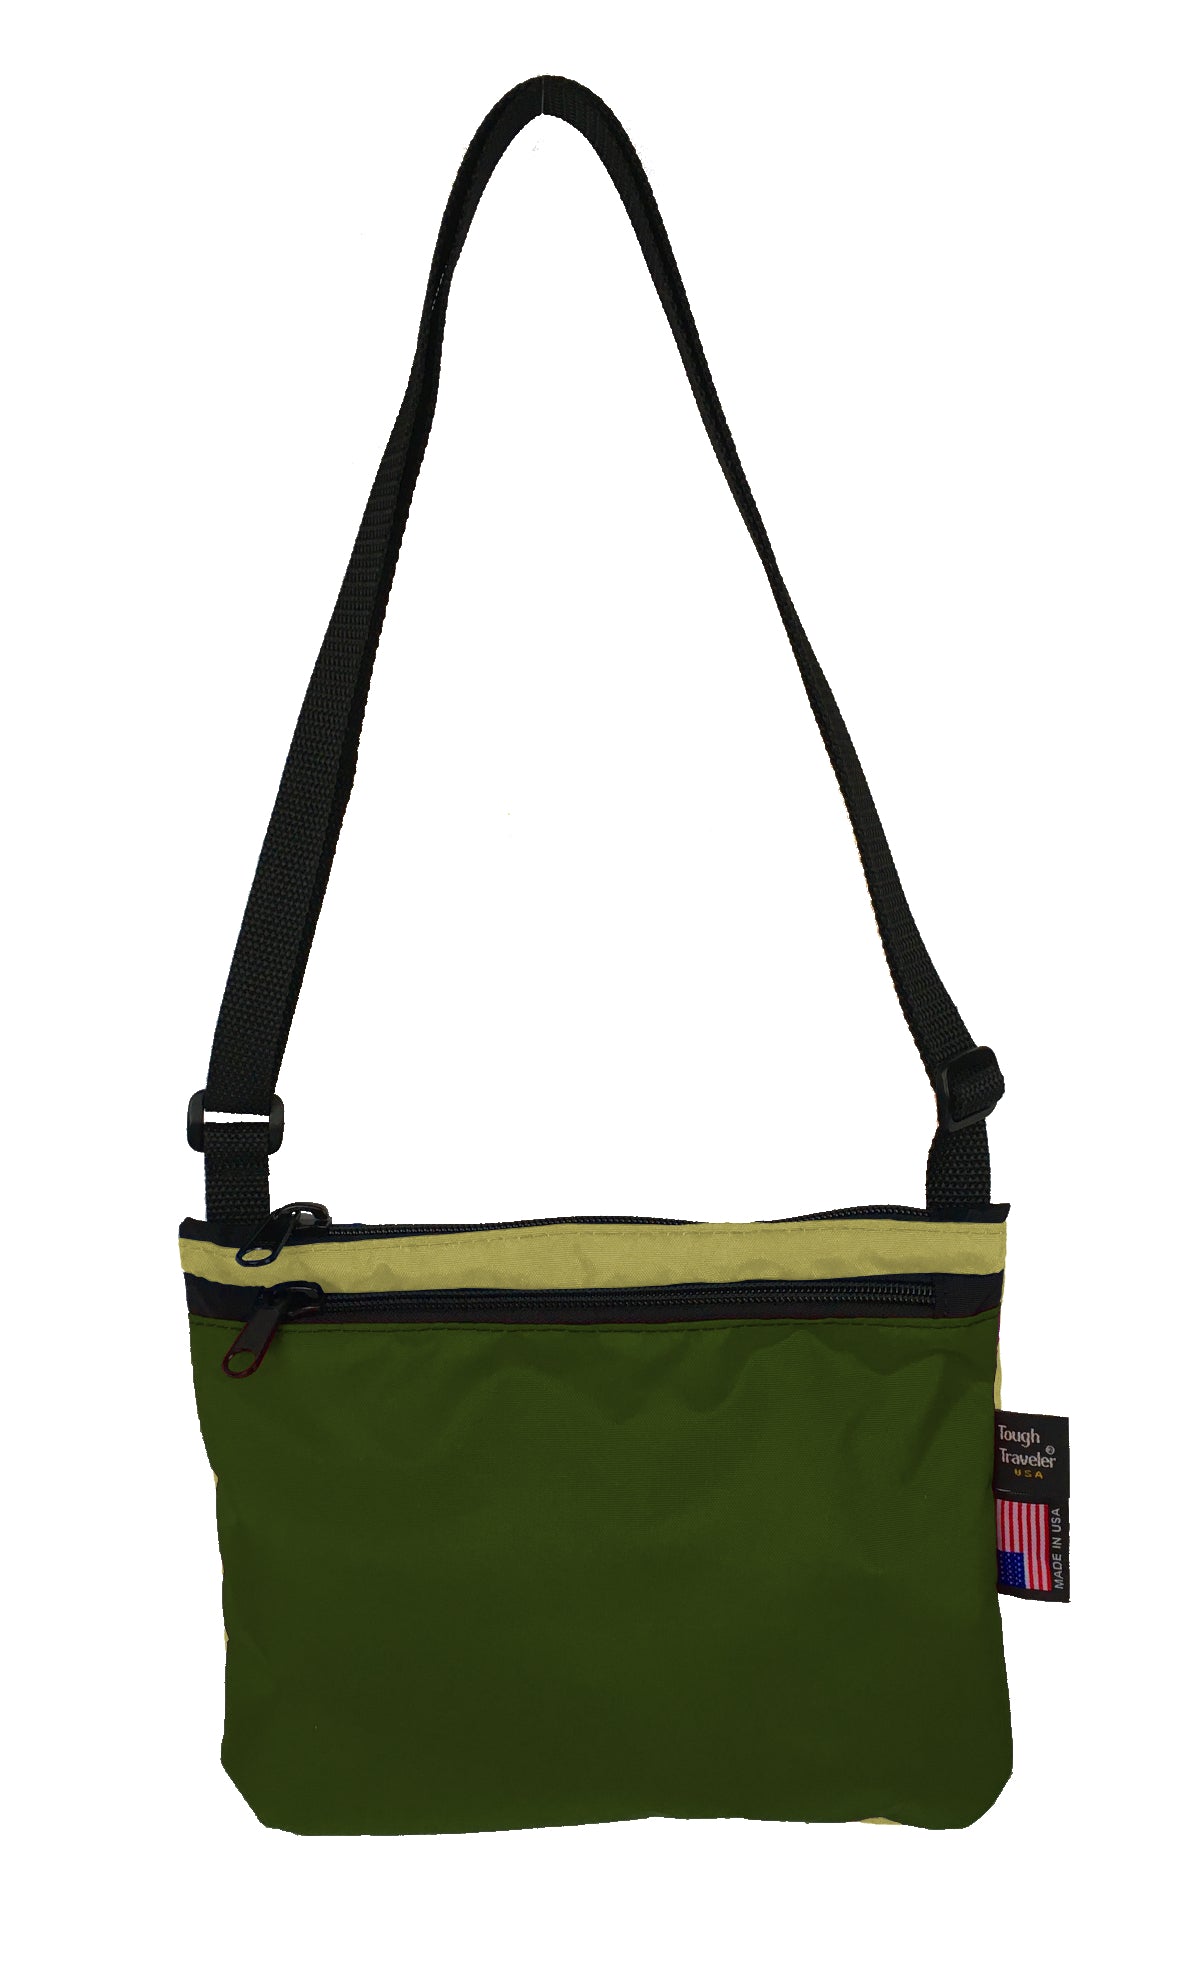 Made in USA MINNOW Bag Shoulder Bags